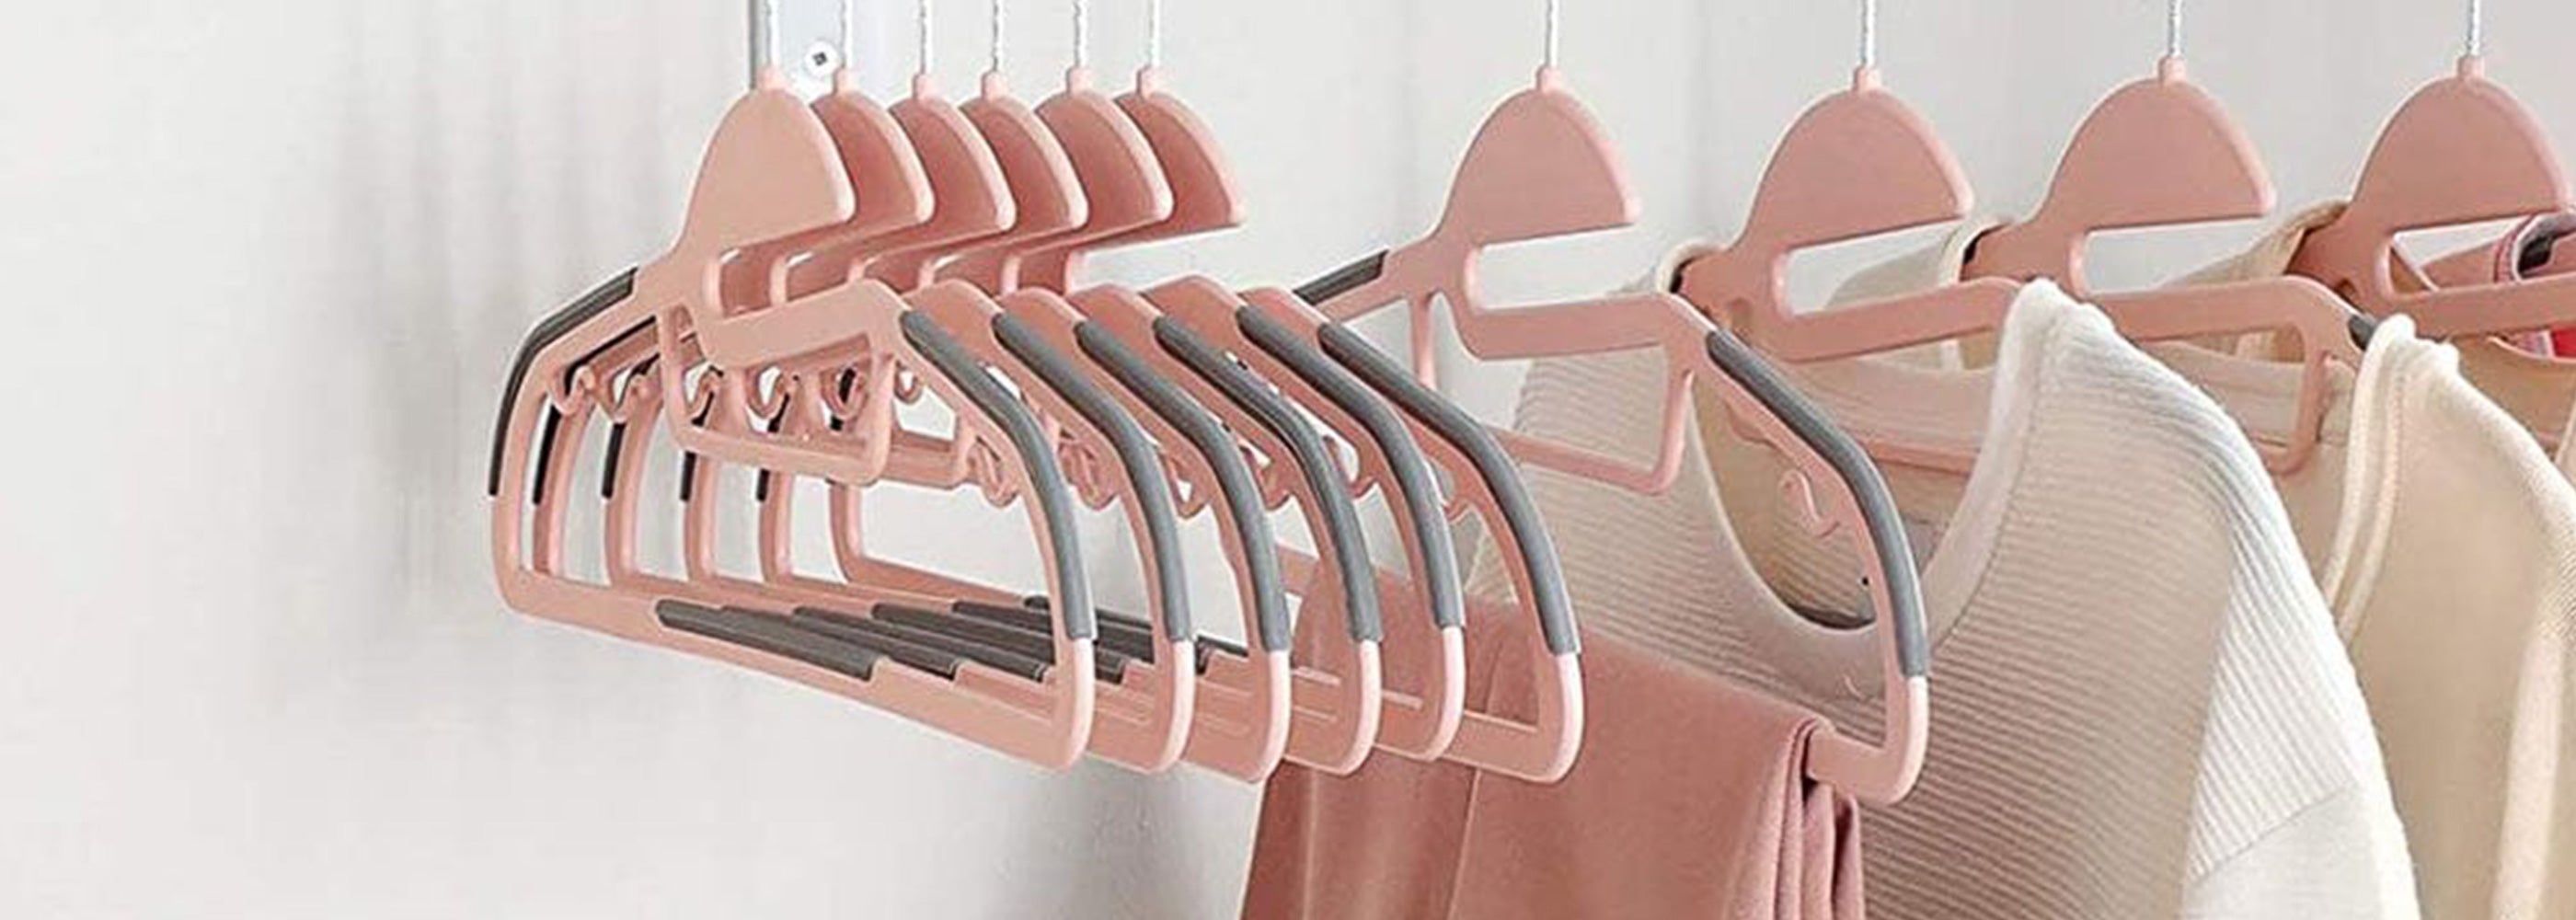 https://cdn.shopify.com/s/files/1/0721/1496/2725/collections/Collection-all-clothes-hangers.jpg?v=1683107660